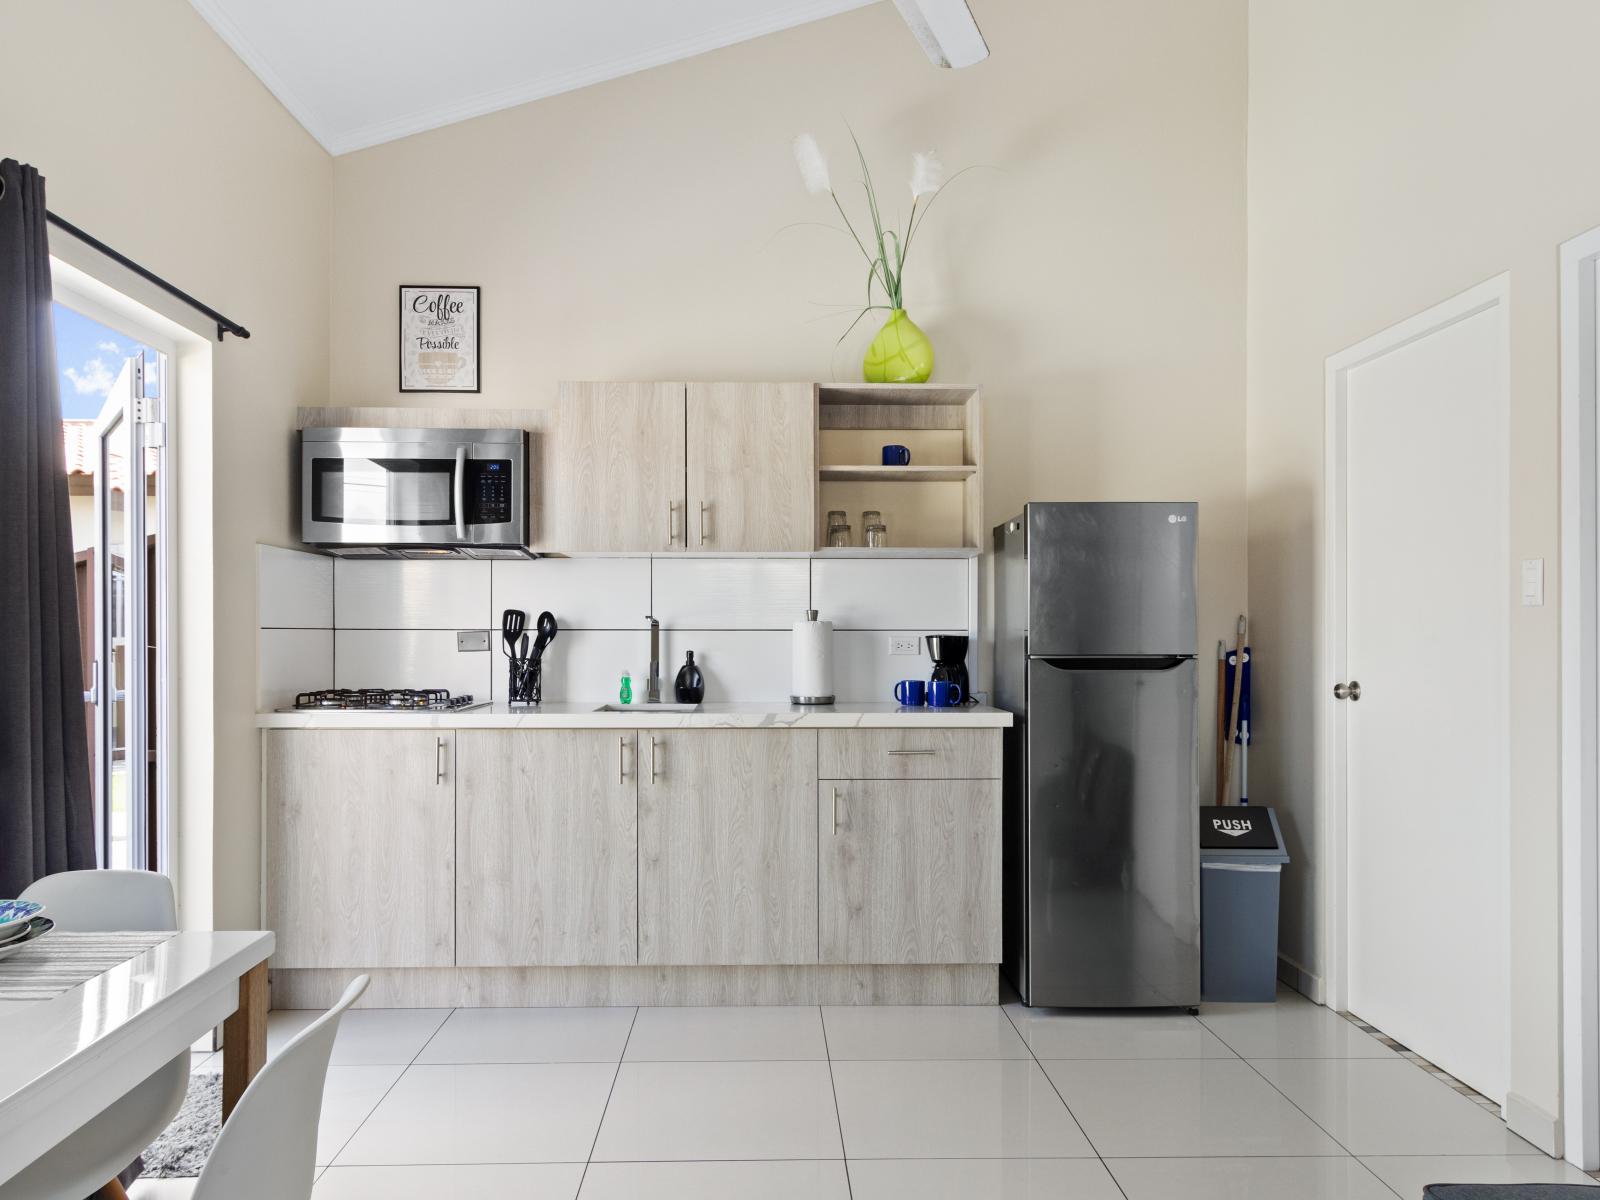 Modern and fully equipped kitchen of the apartment in Noord, Aruba - Availability of all kitchen accessories - Elegant lighting - Large amount of storage - Sufficient space to work according to your ease - Excellent bright space of villa